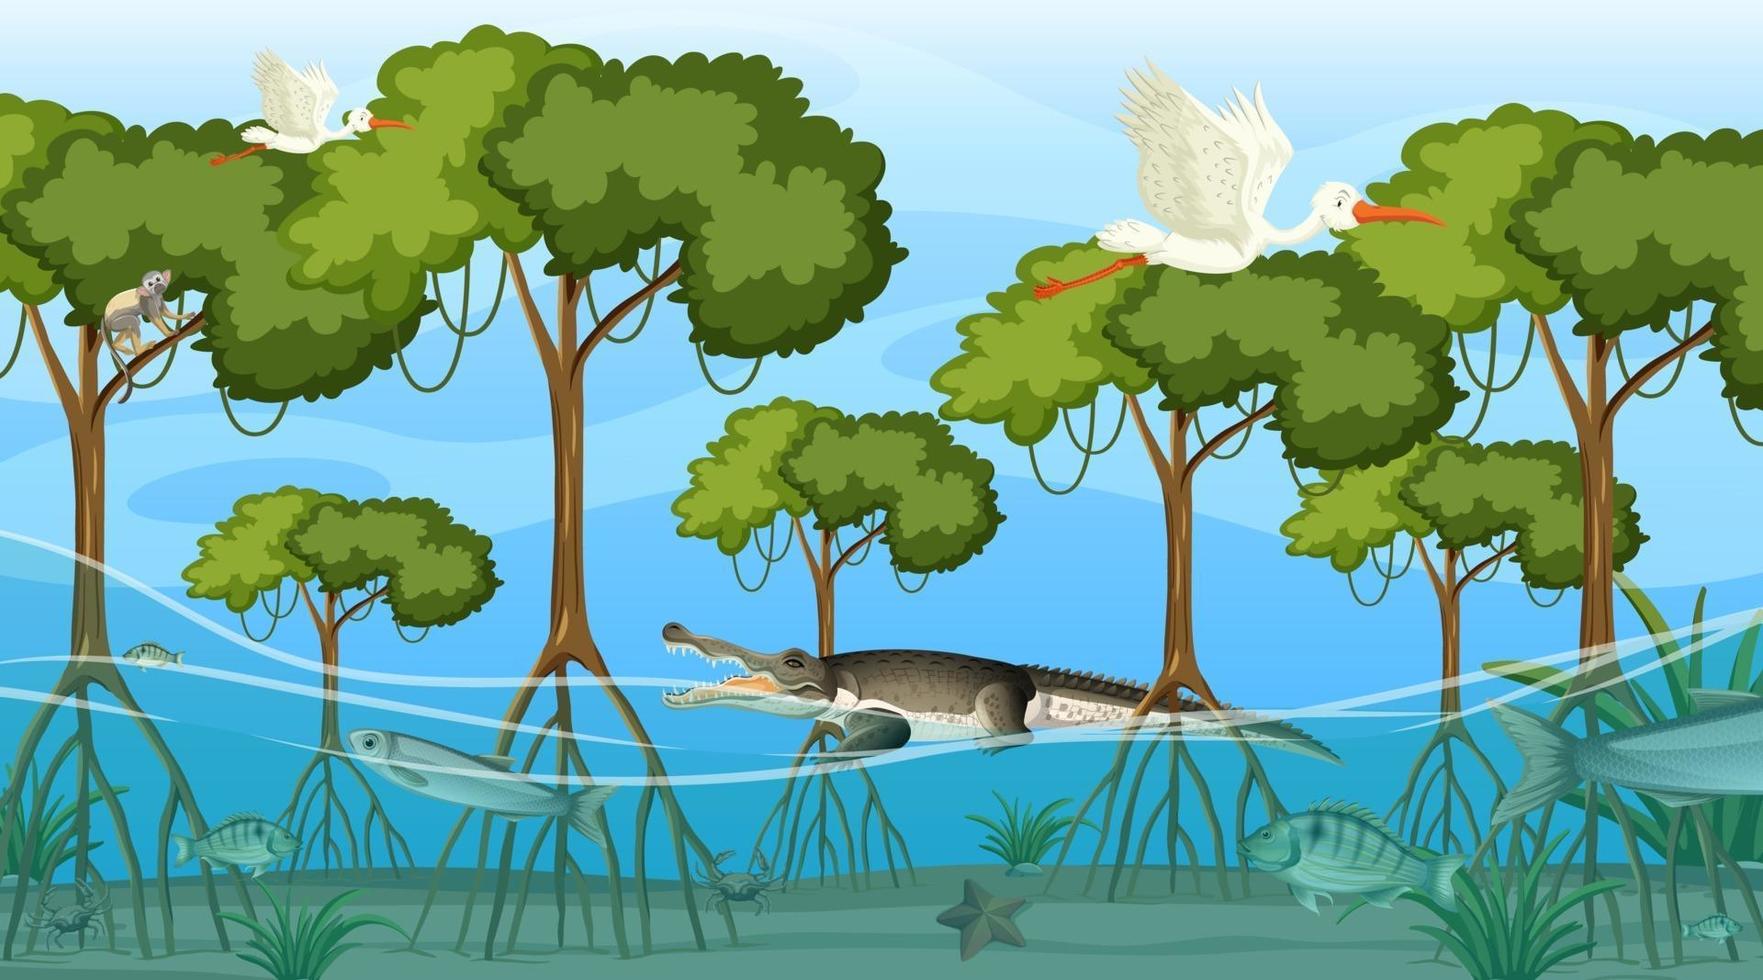 Animals live in Mangrove forest at daytime scene vector